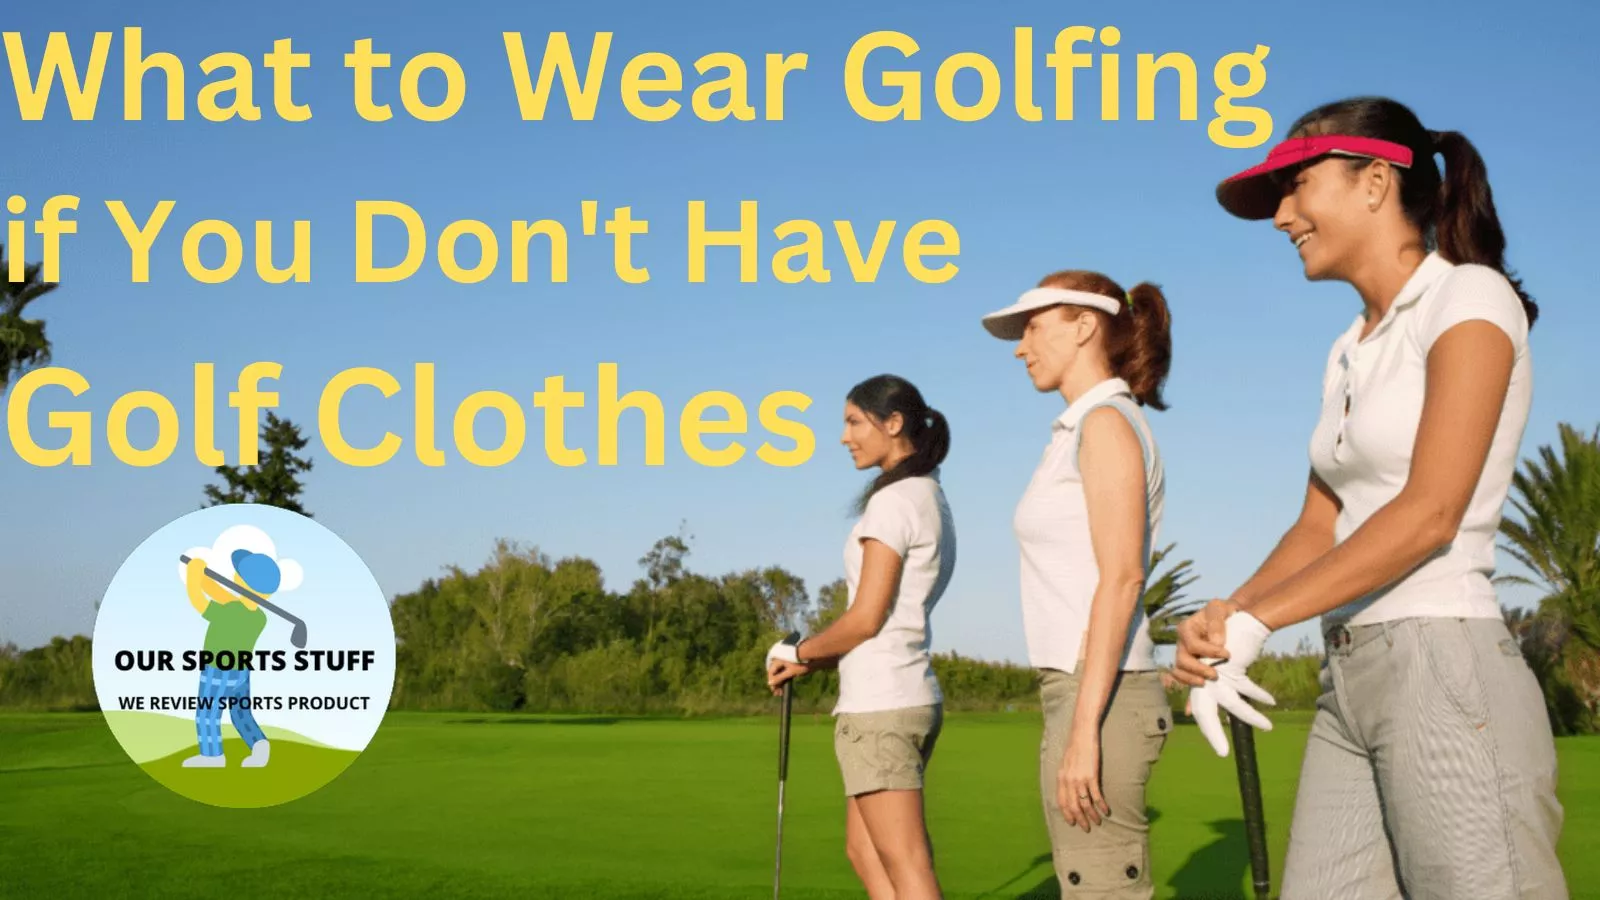 What to Wear Golfing if You don’t Have Golf Clothes